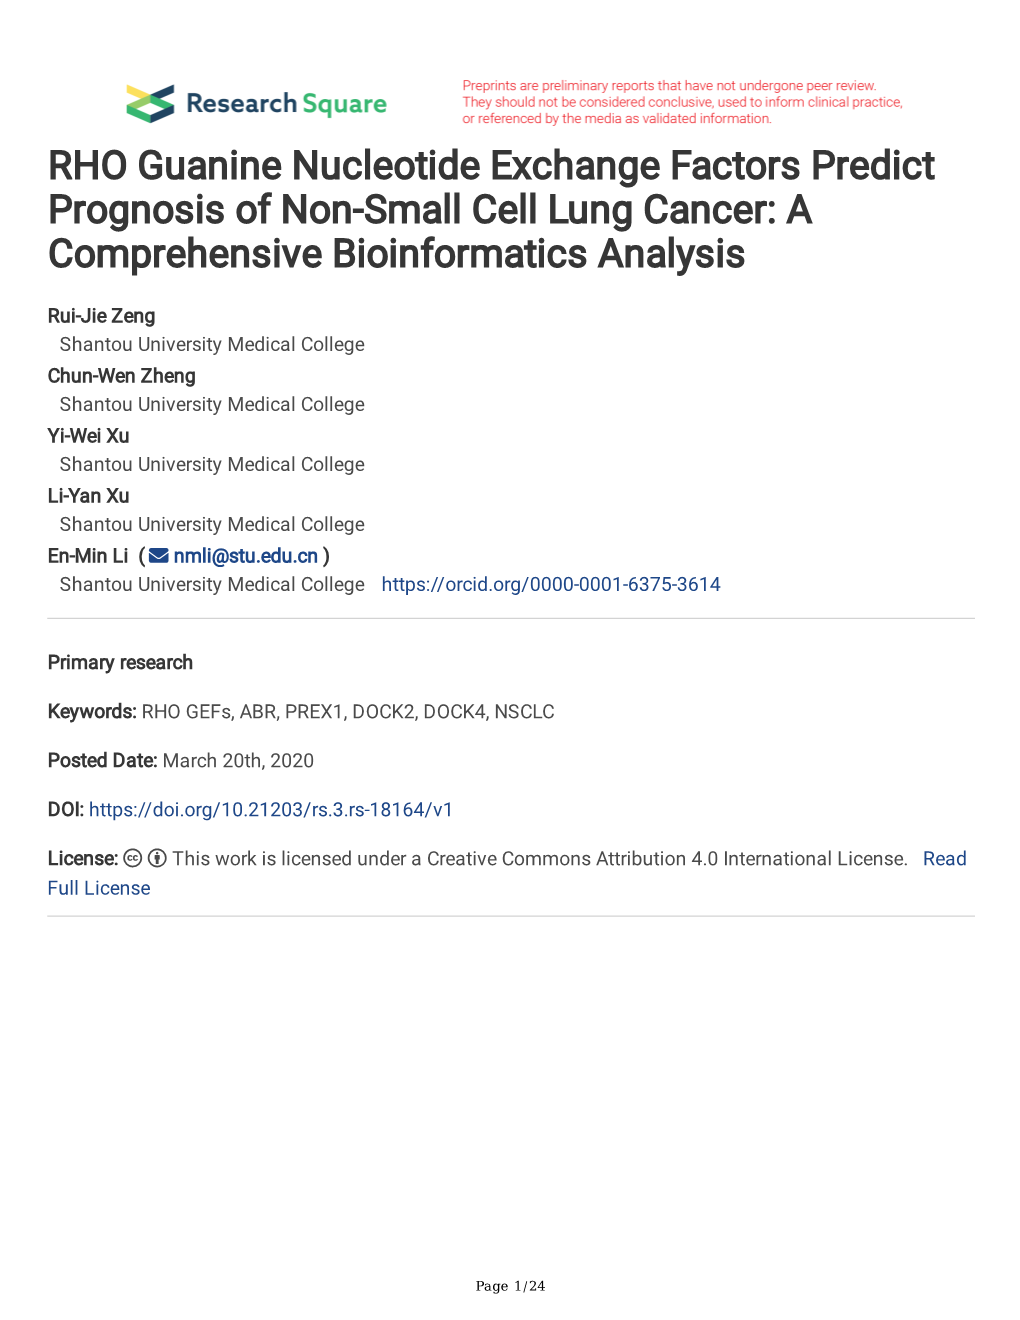 RHO Guanine Nucleotide Exchange Factors Predict Prognosis of Non-Small Cell Lung Cancer: a Comprehensive Bioinformatics Analysis